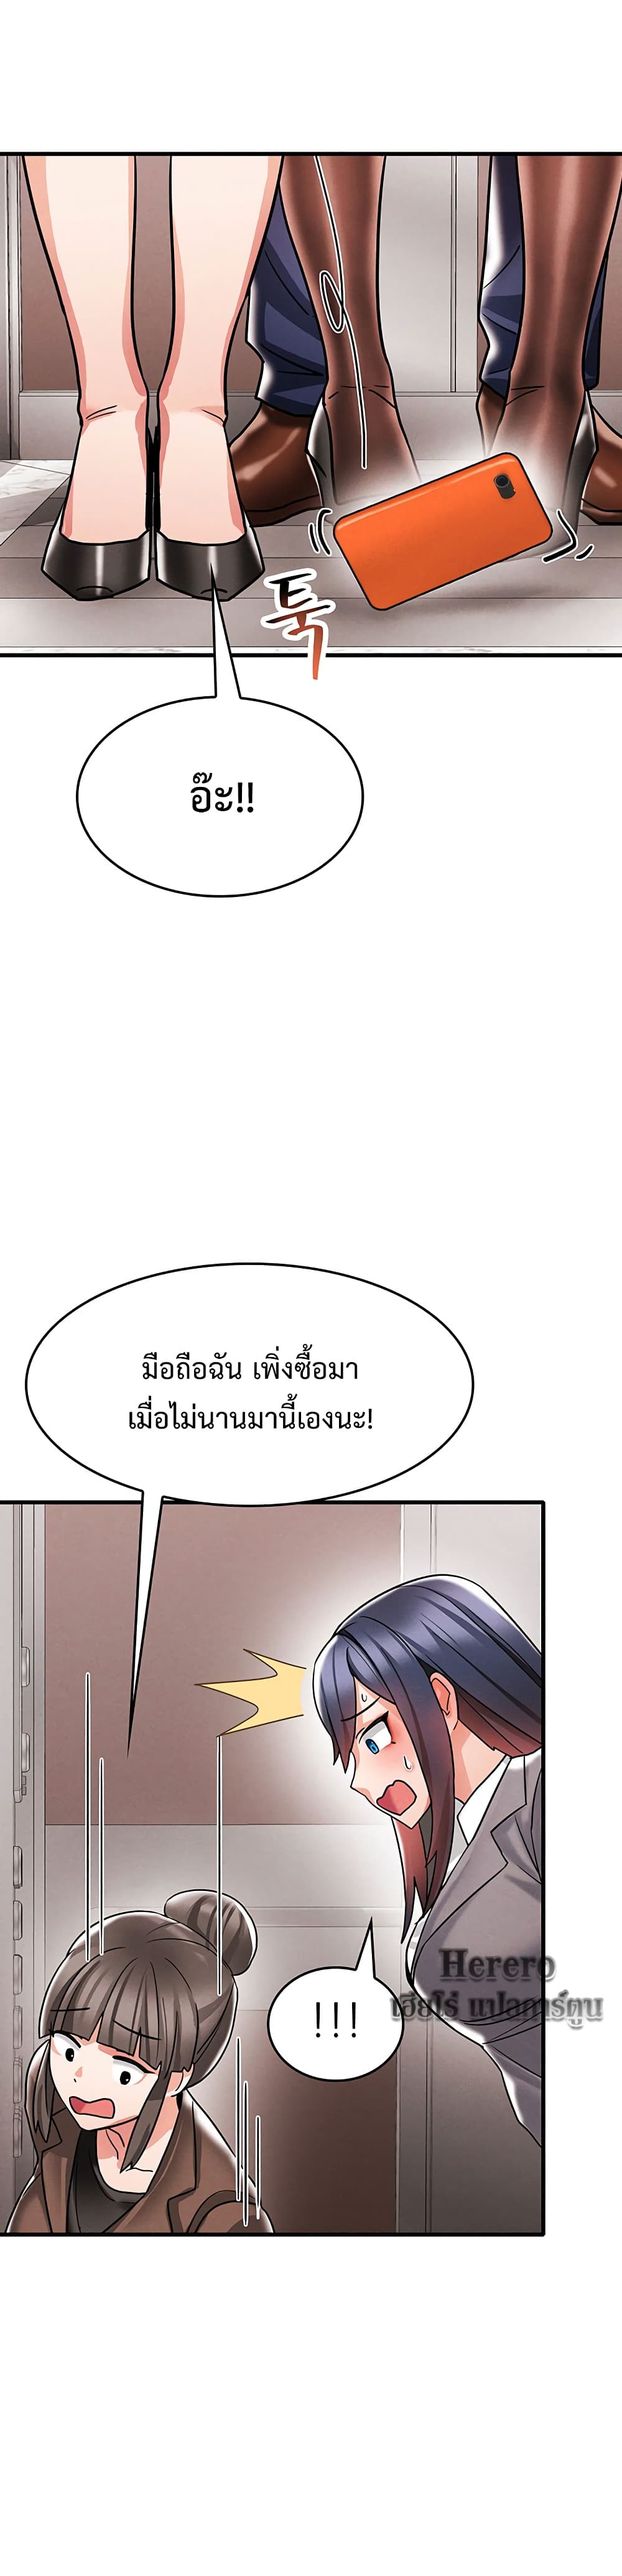 Relationship Reverse Button: Let’s Make Her Submissive 4 ภาพที่ 21